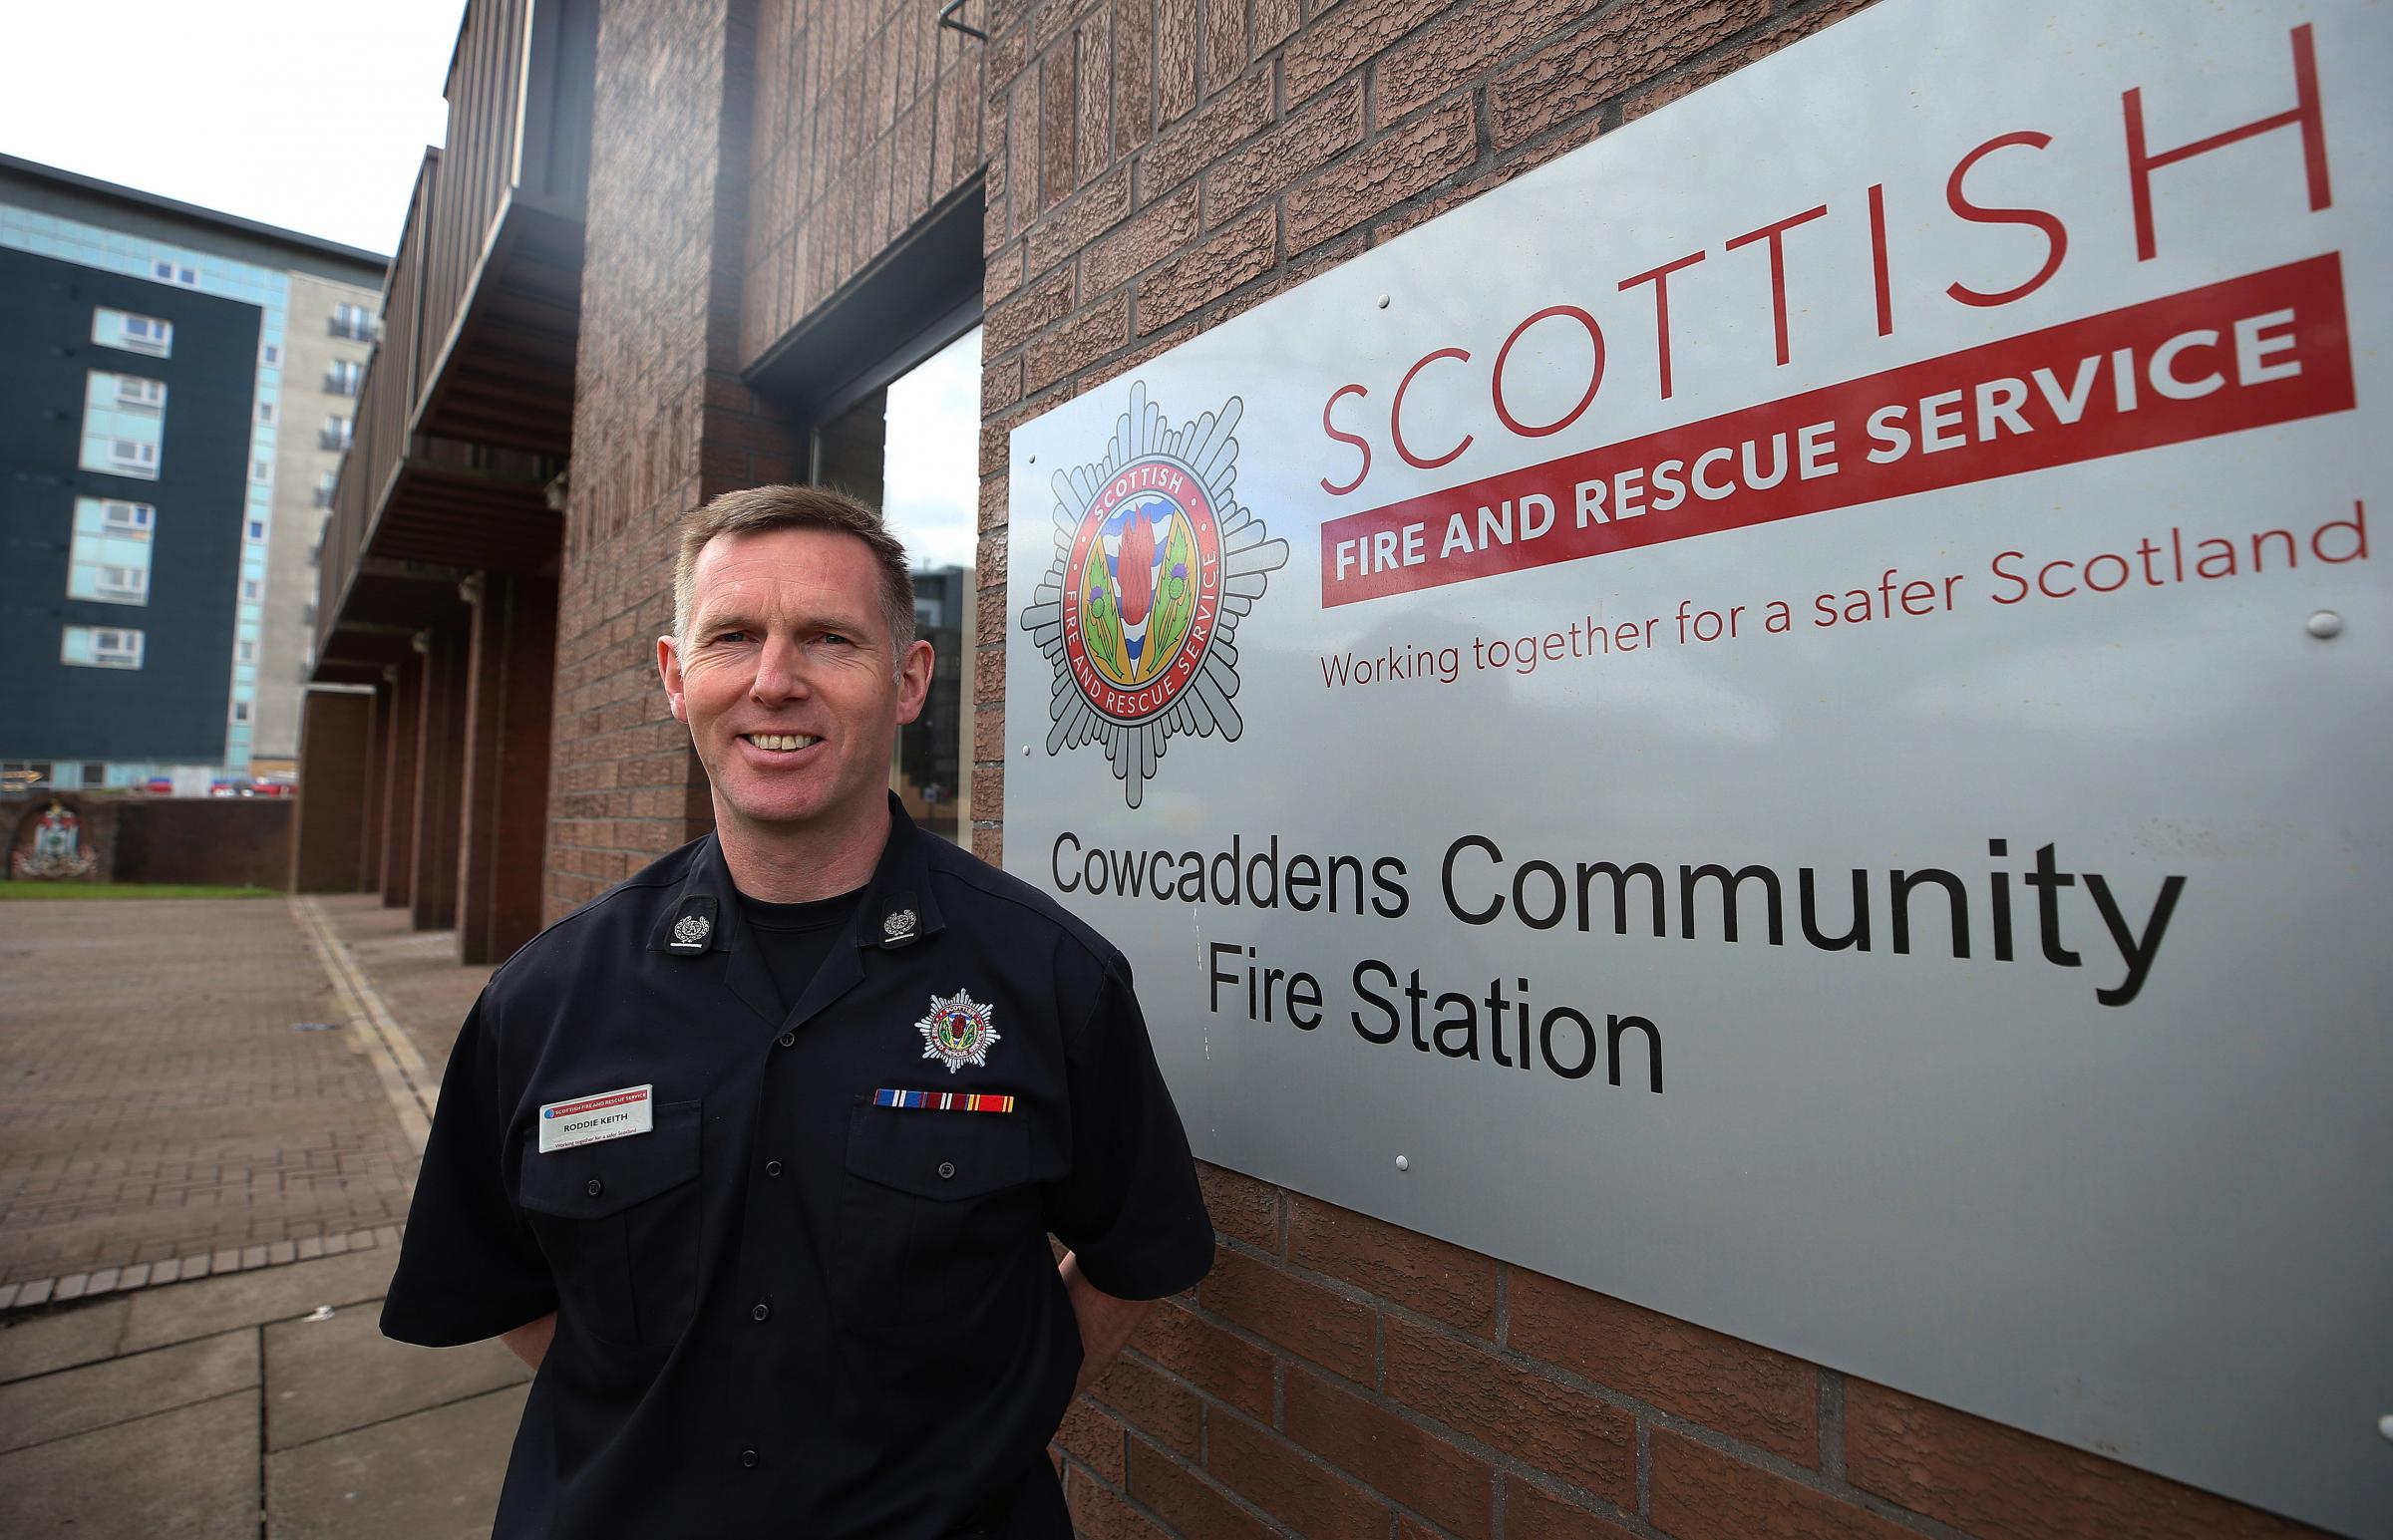 Area Commander Roddie Keith at Cowcaddens Fire Station Picture: Gordon Terris